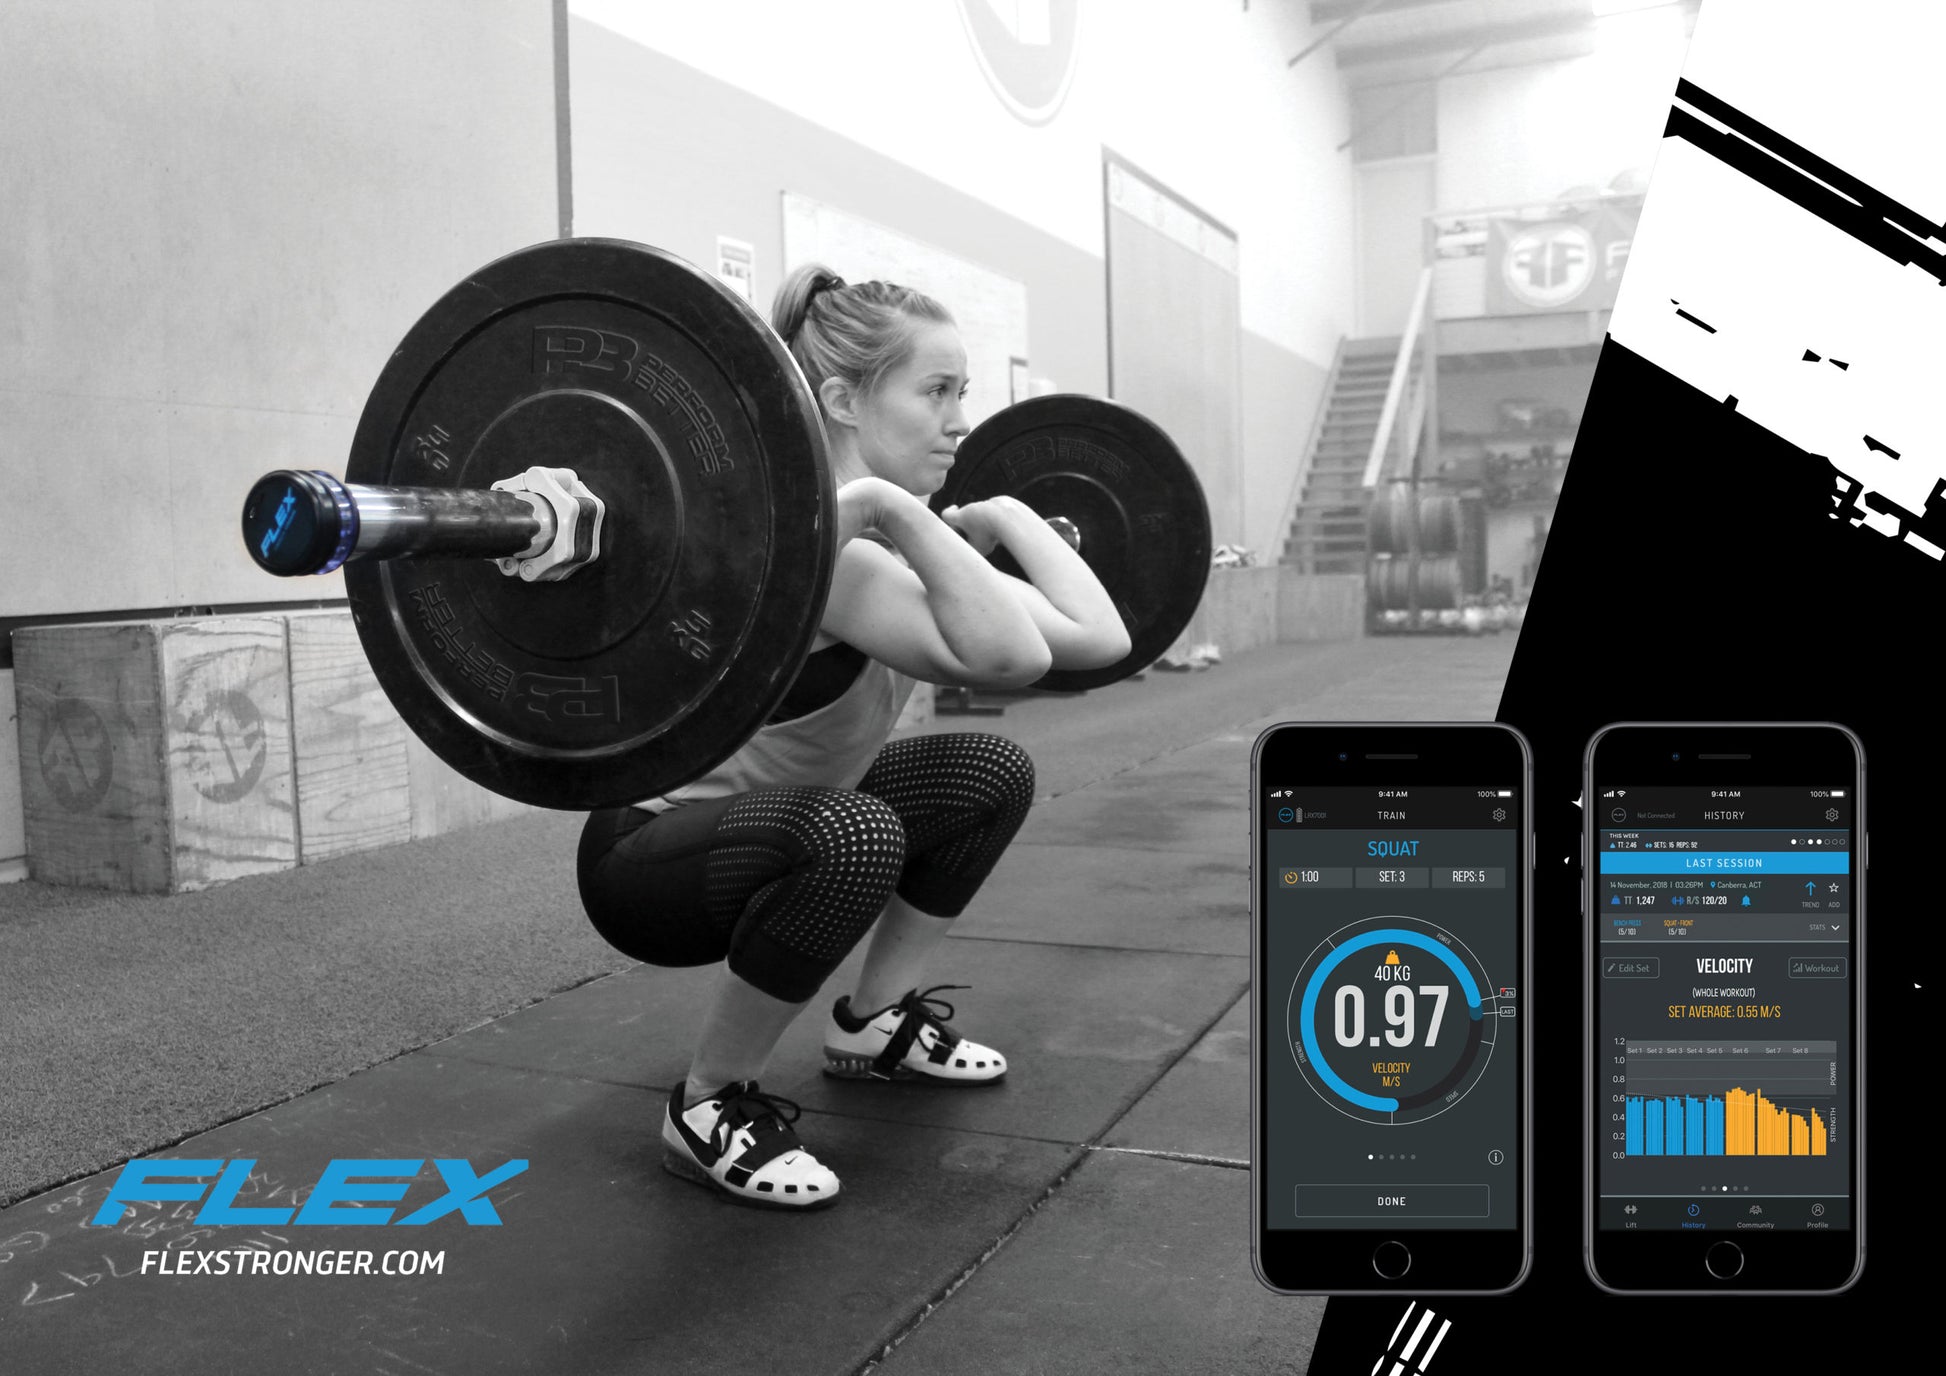 Flex powered by GymAware - Part of the Perform Better UK Range